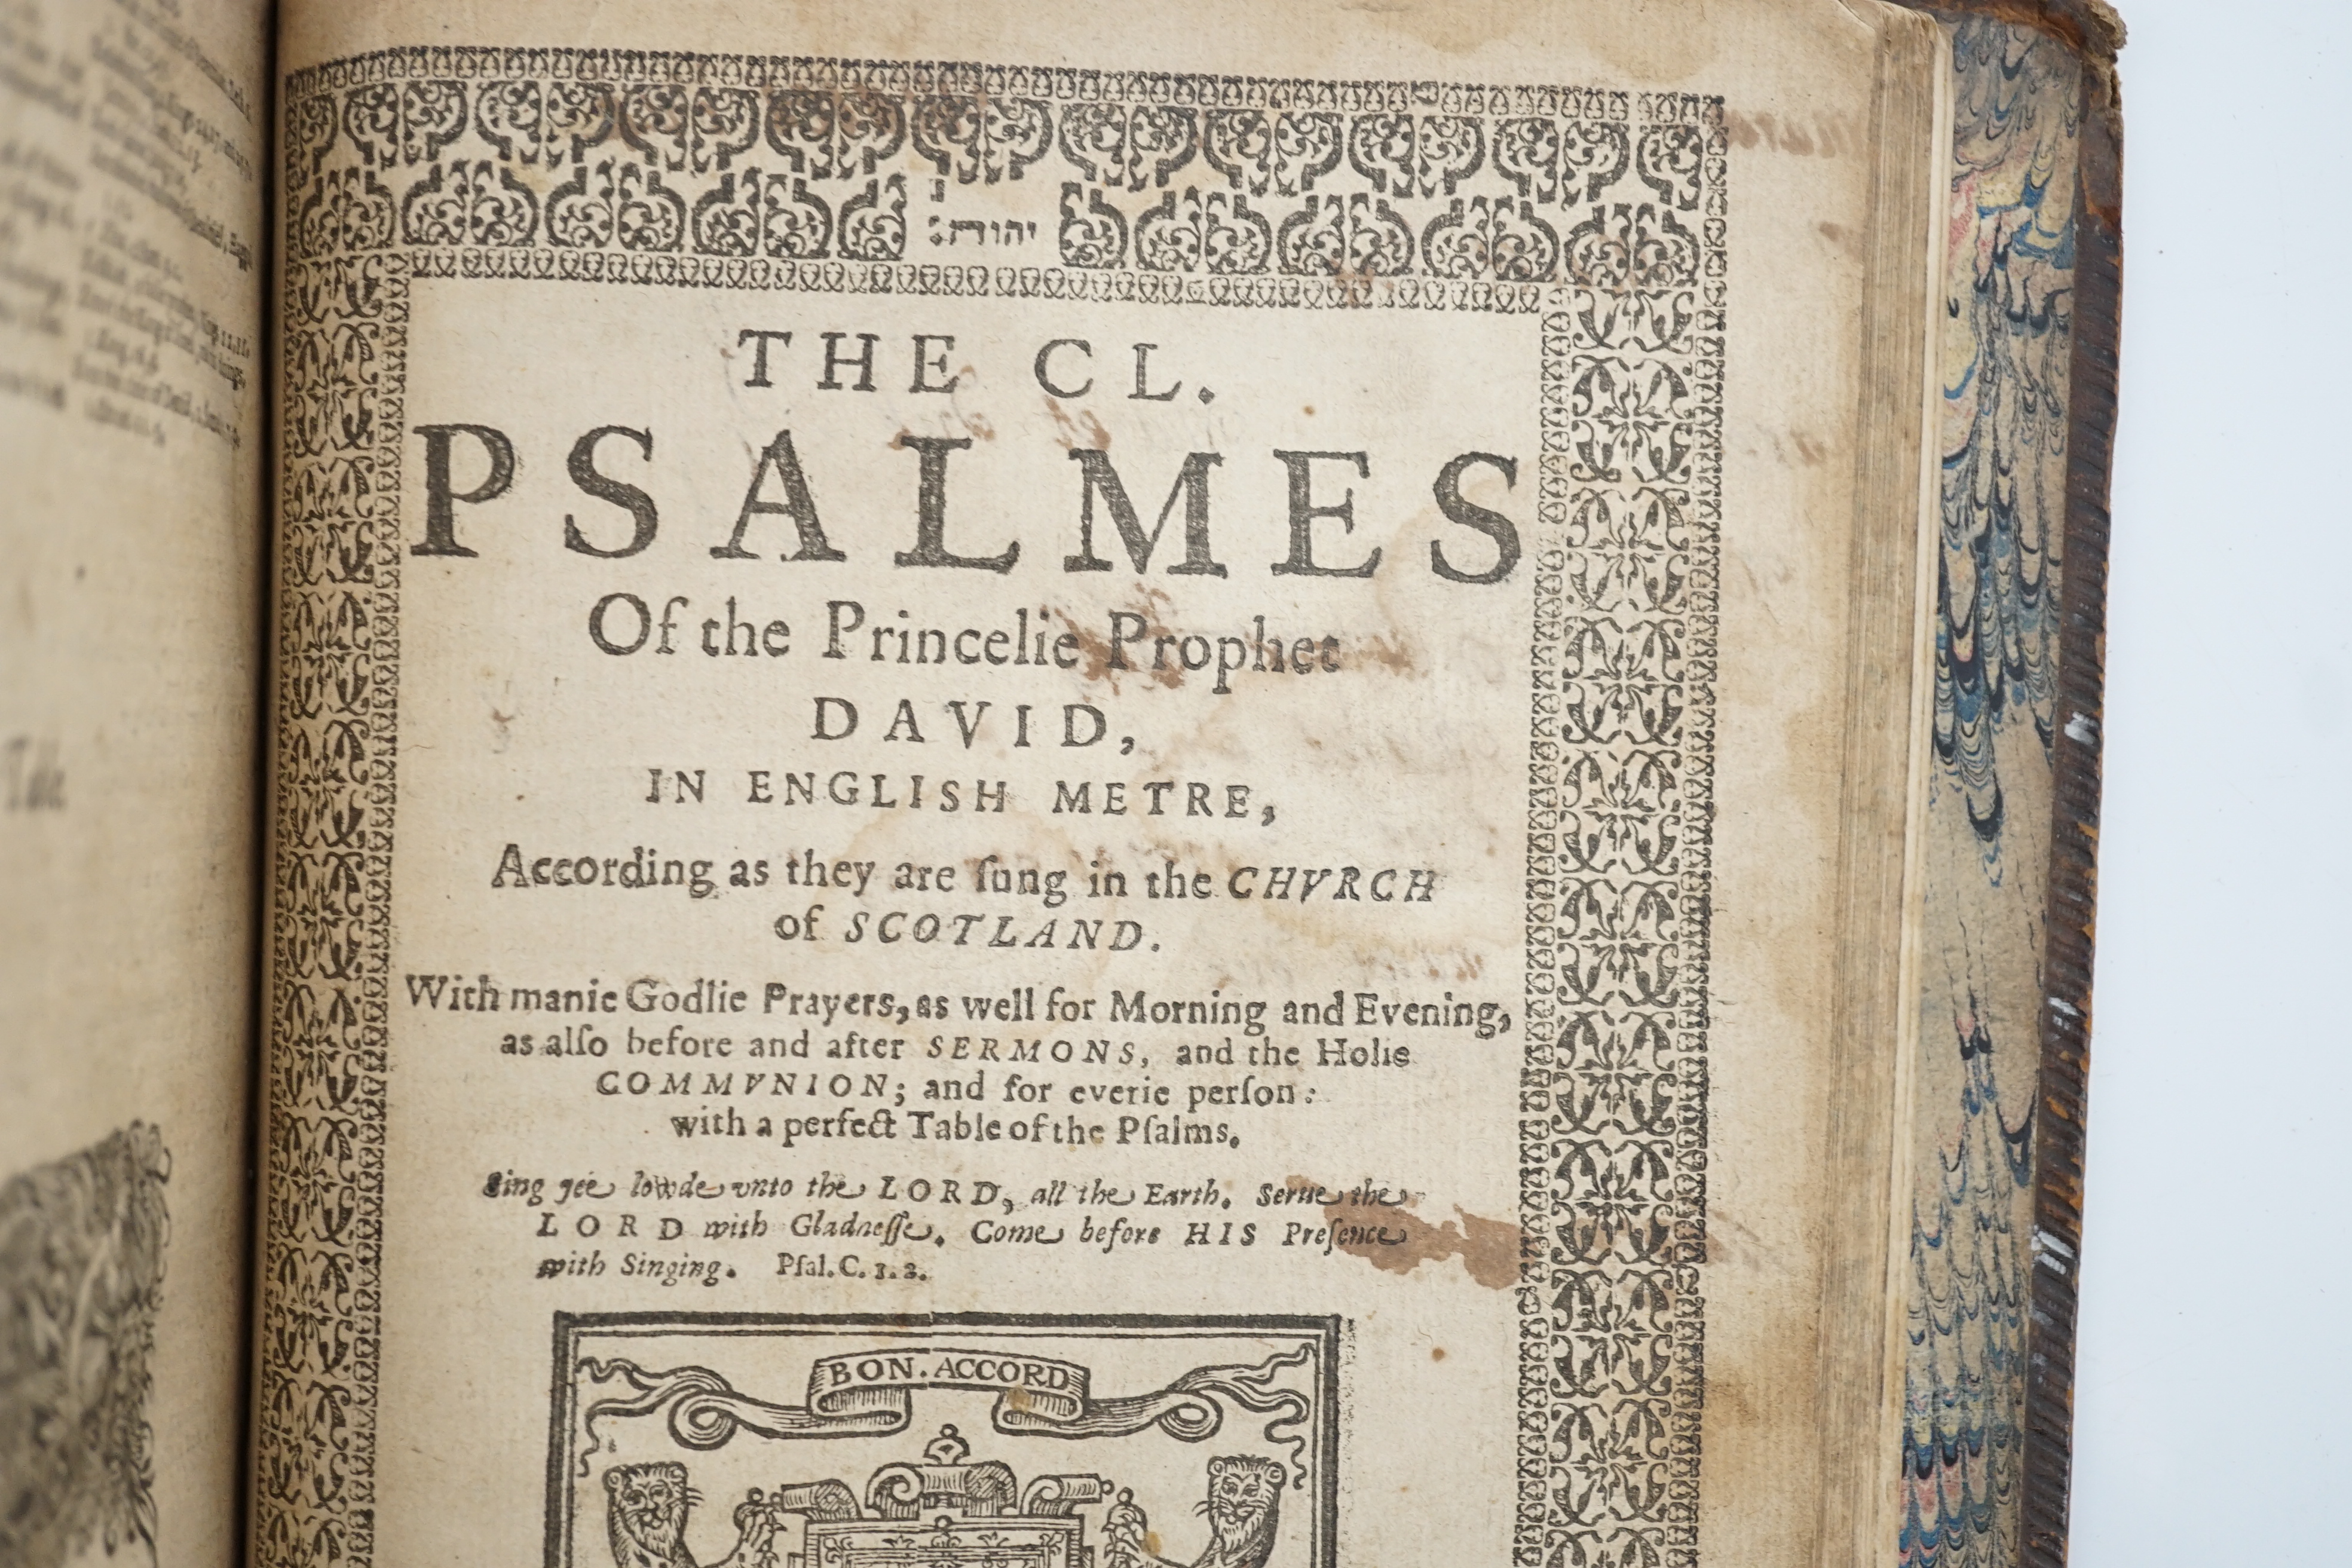 [The rare 'Aberdonian' Scottish Psalms] The CL. Psalmes of the Princelie Prophet David ... According as they are Sung in the Church of Scotland ... title with engraved arms of the City, and all within decorated borders.